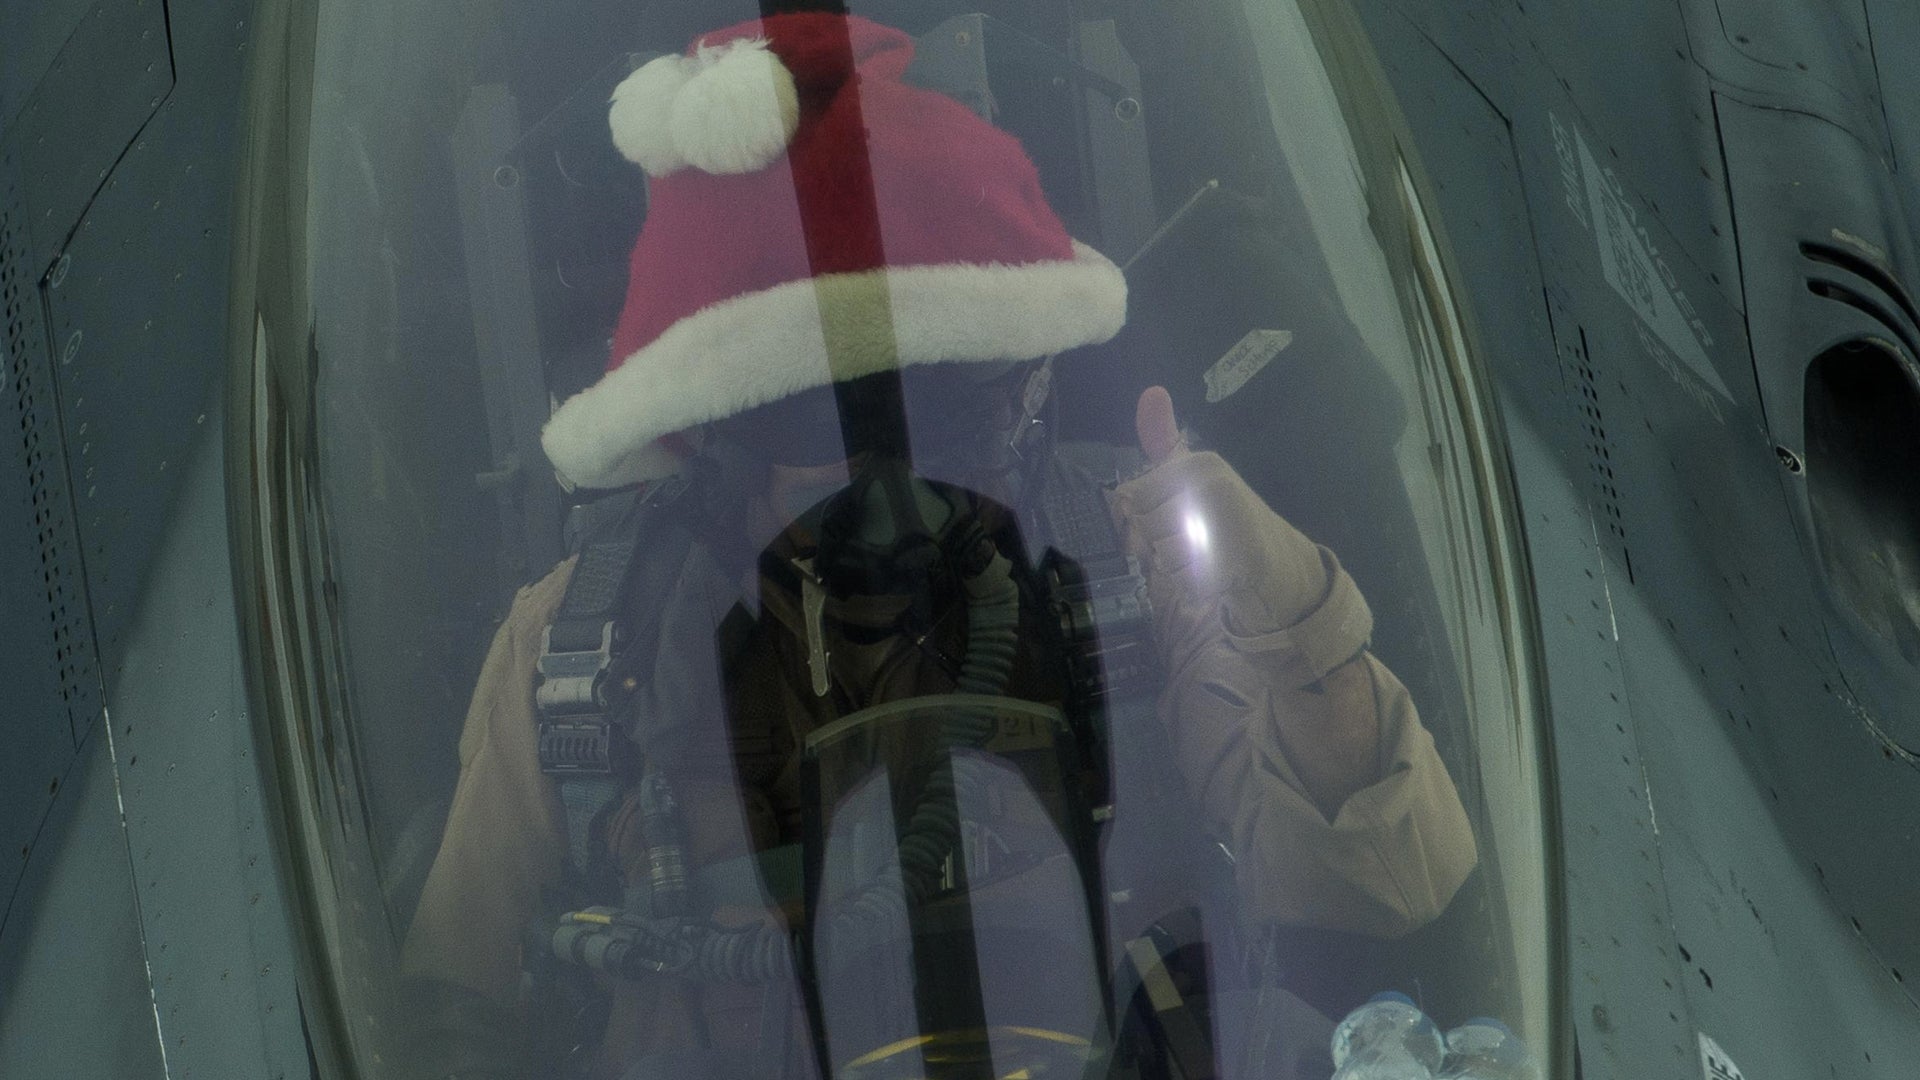 An F-16 Fighting Falcon pilot dons a traditional “Santa” hat while receiving fuel from a KC-10 Extender over Iraq, Dec. 25, 2016. (Senior Airman Tyler Woodward/U.S. Air Force)